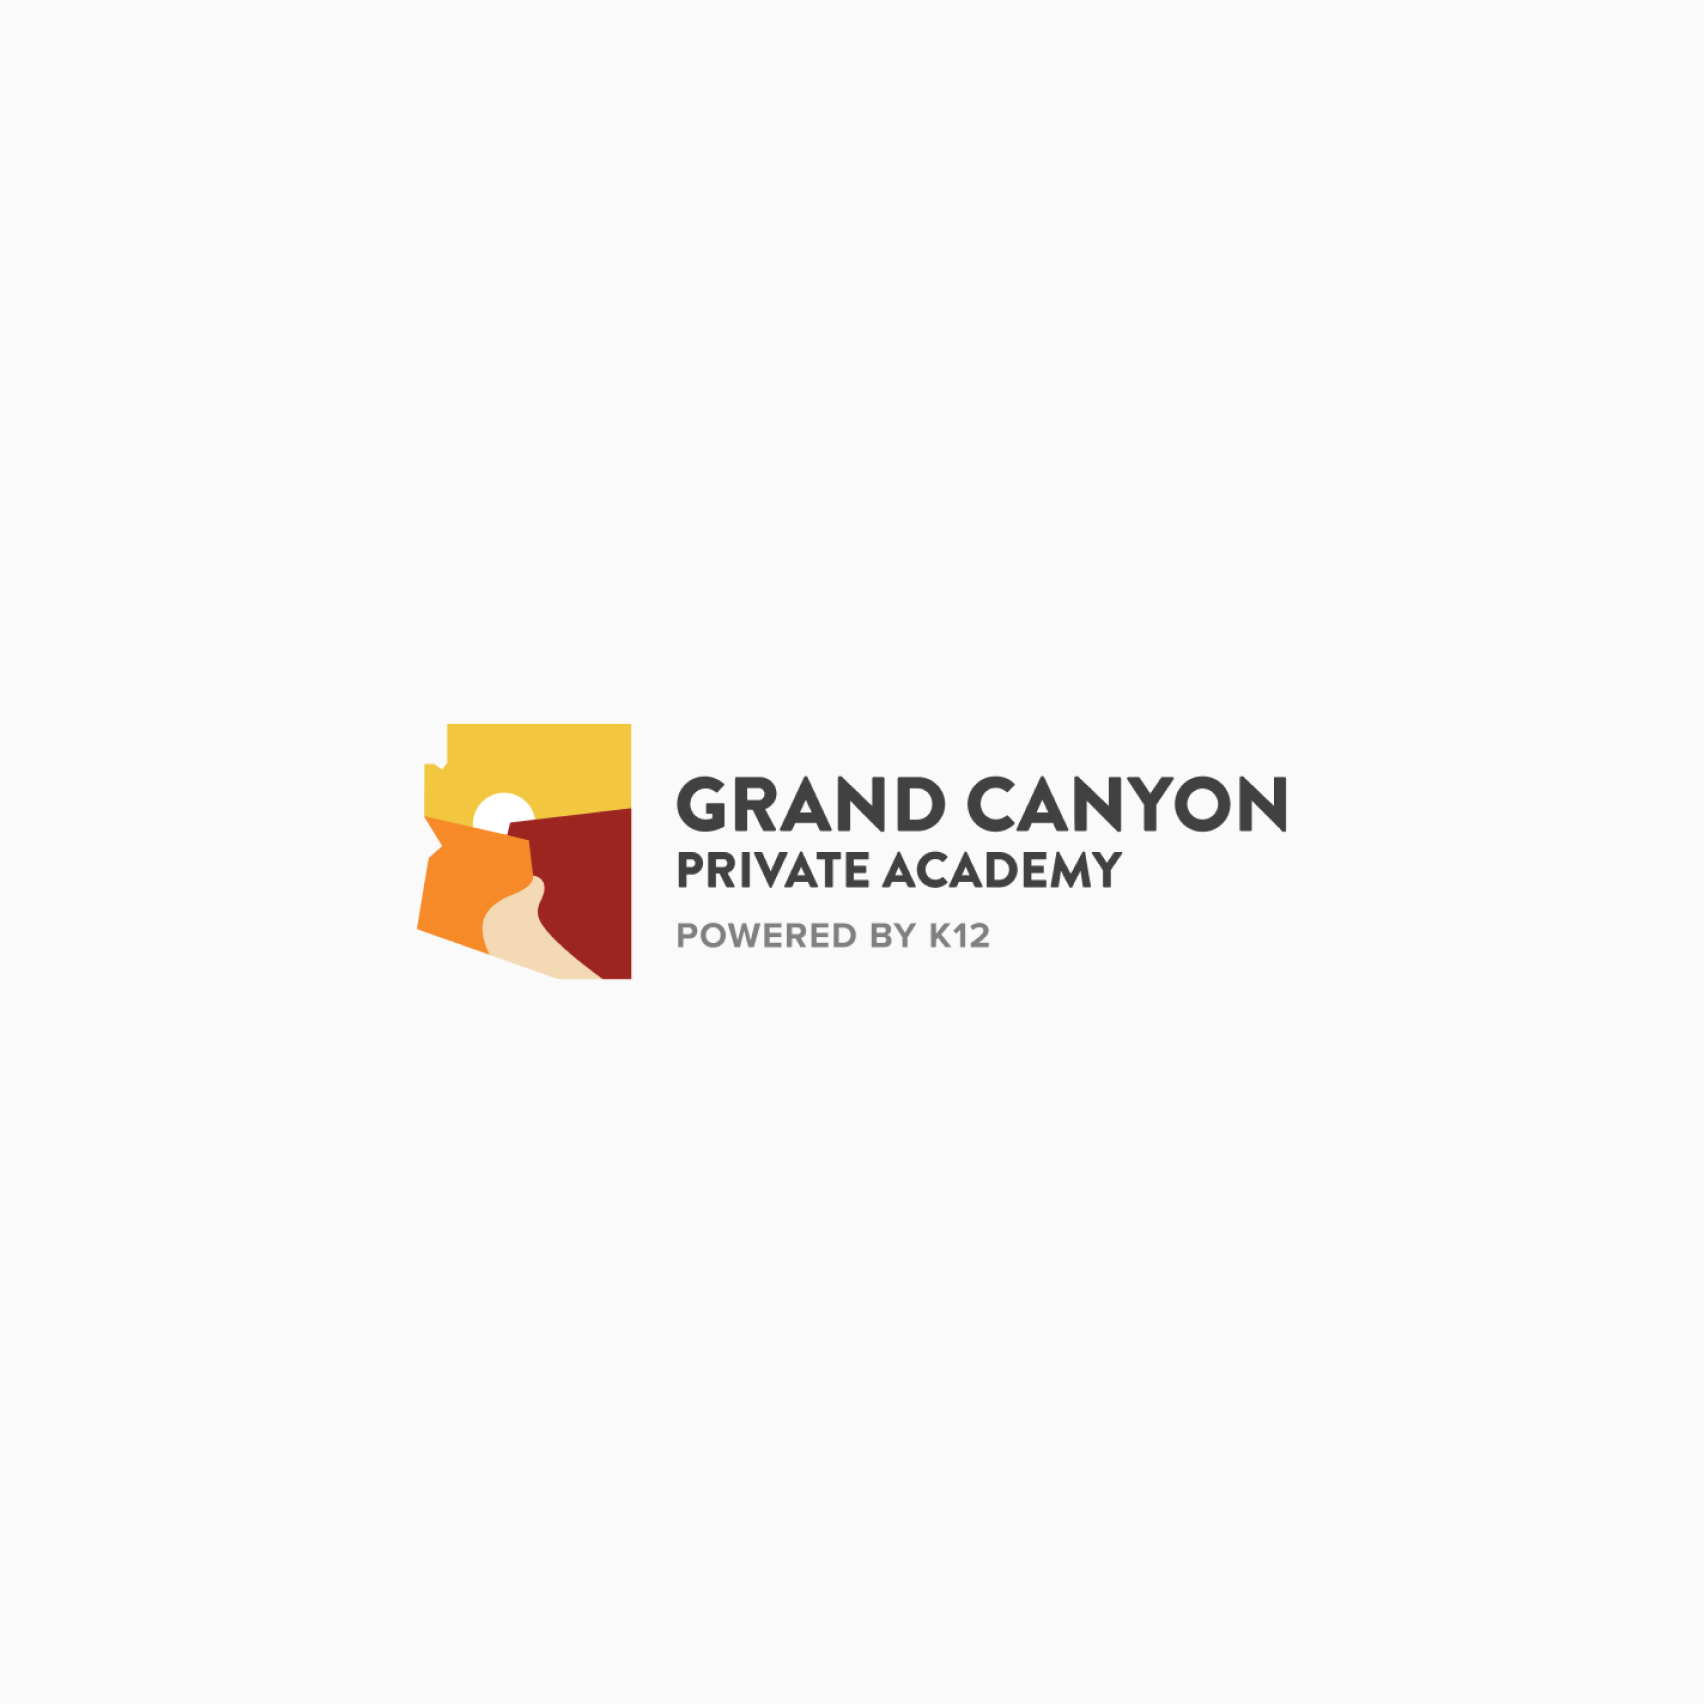 Tuition and Costs image 11 (name Grand Canyon)